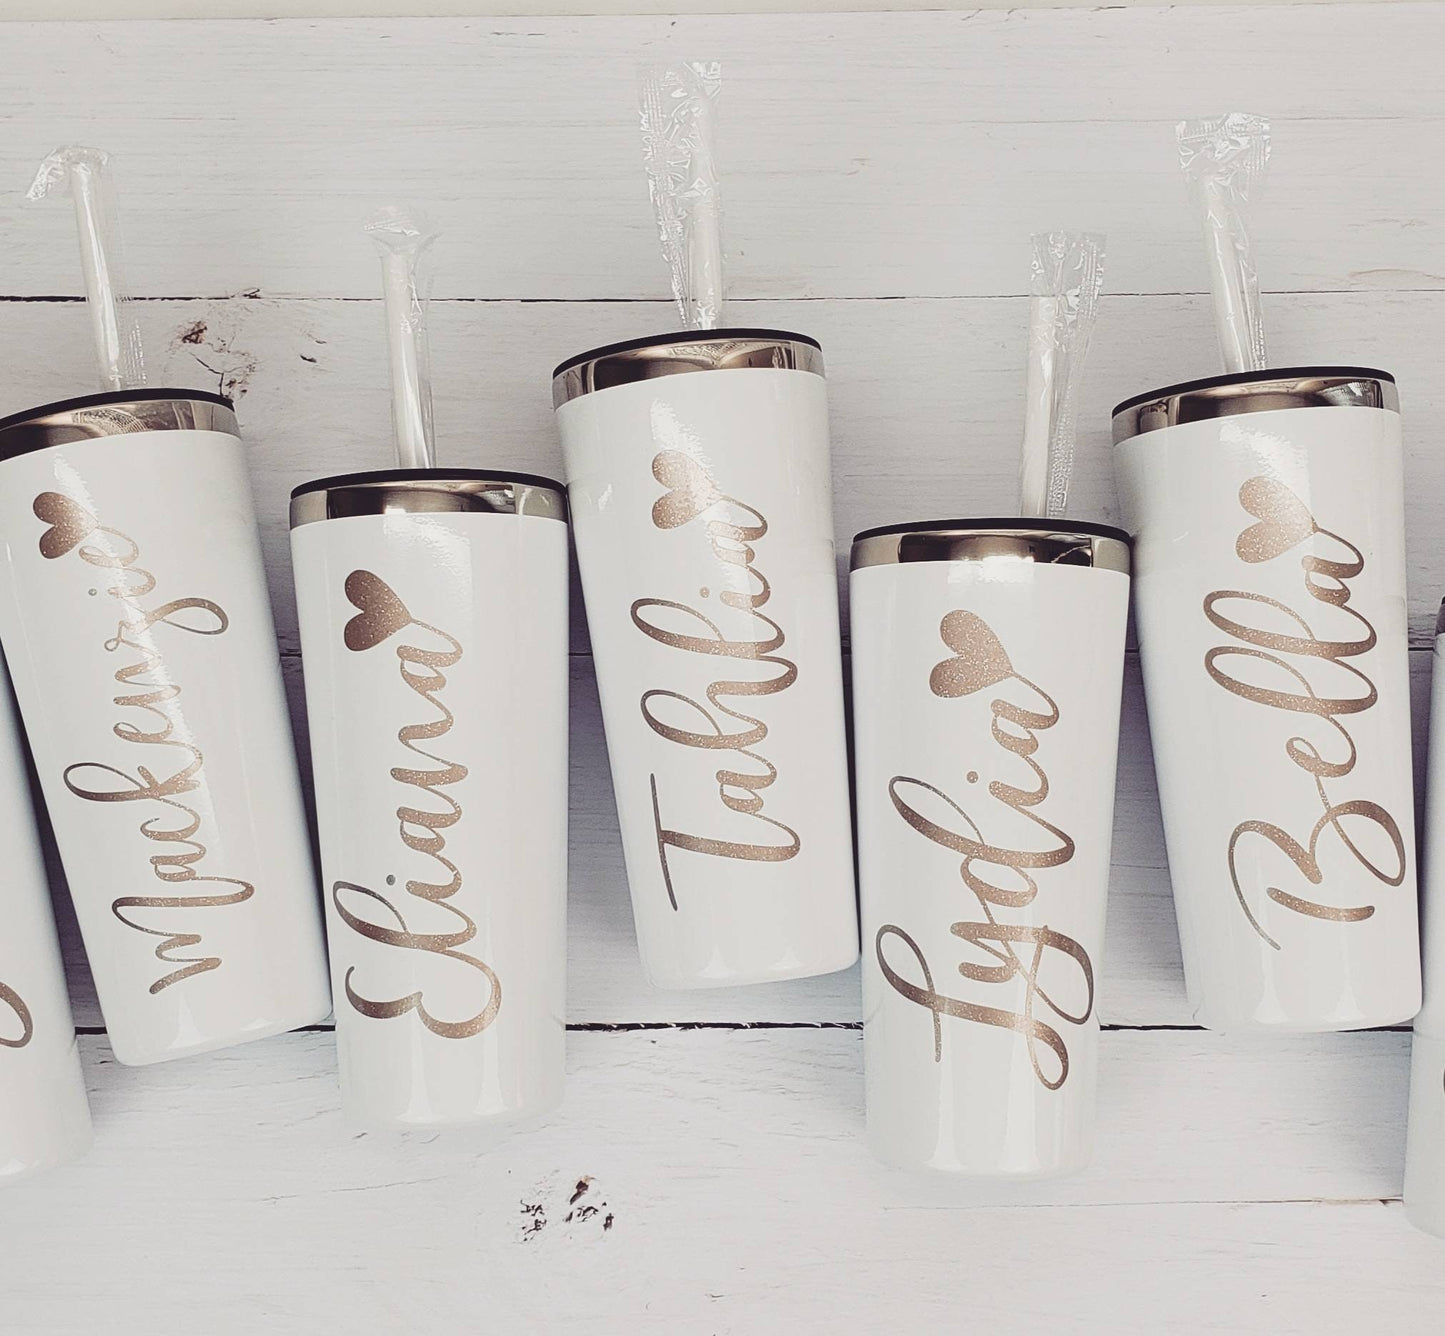 Personalized Tumbler with Name & Heart - Personalized Brides